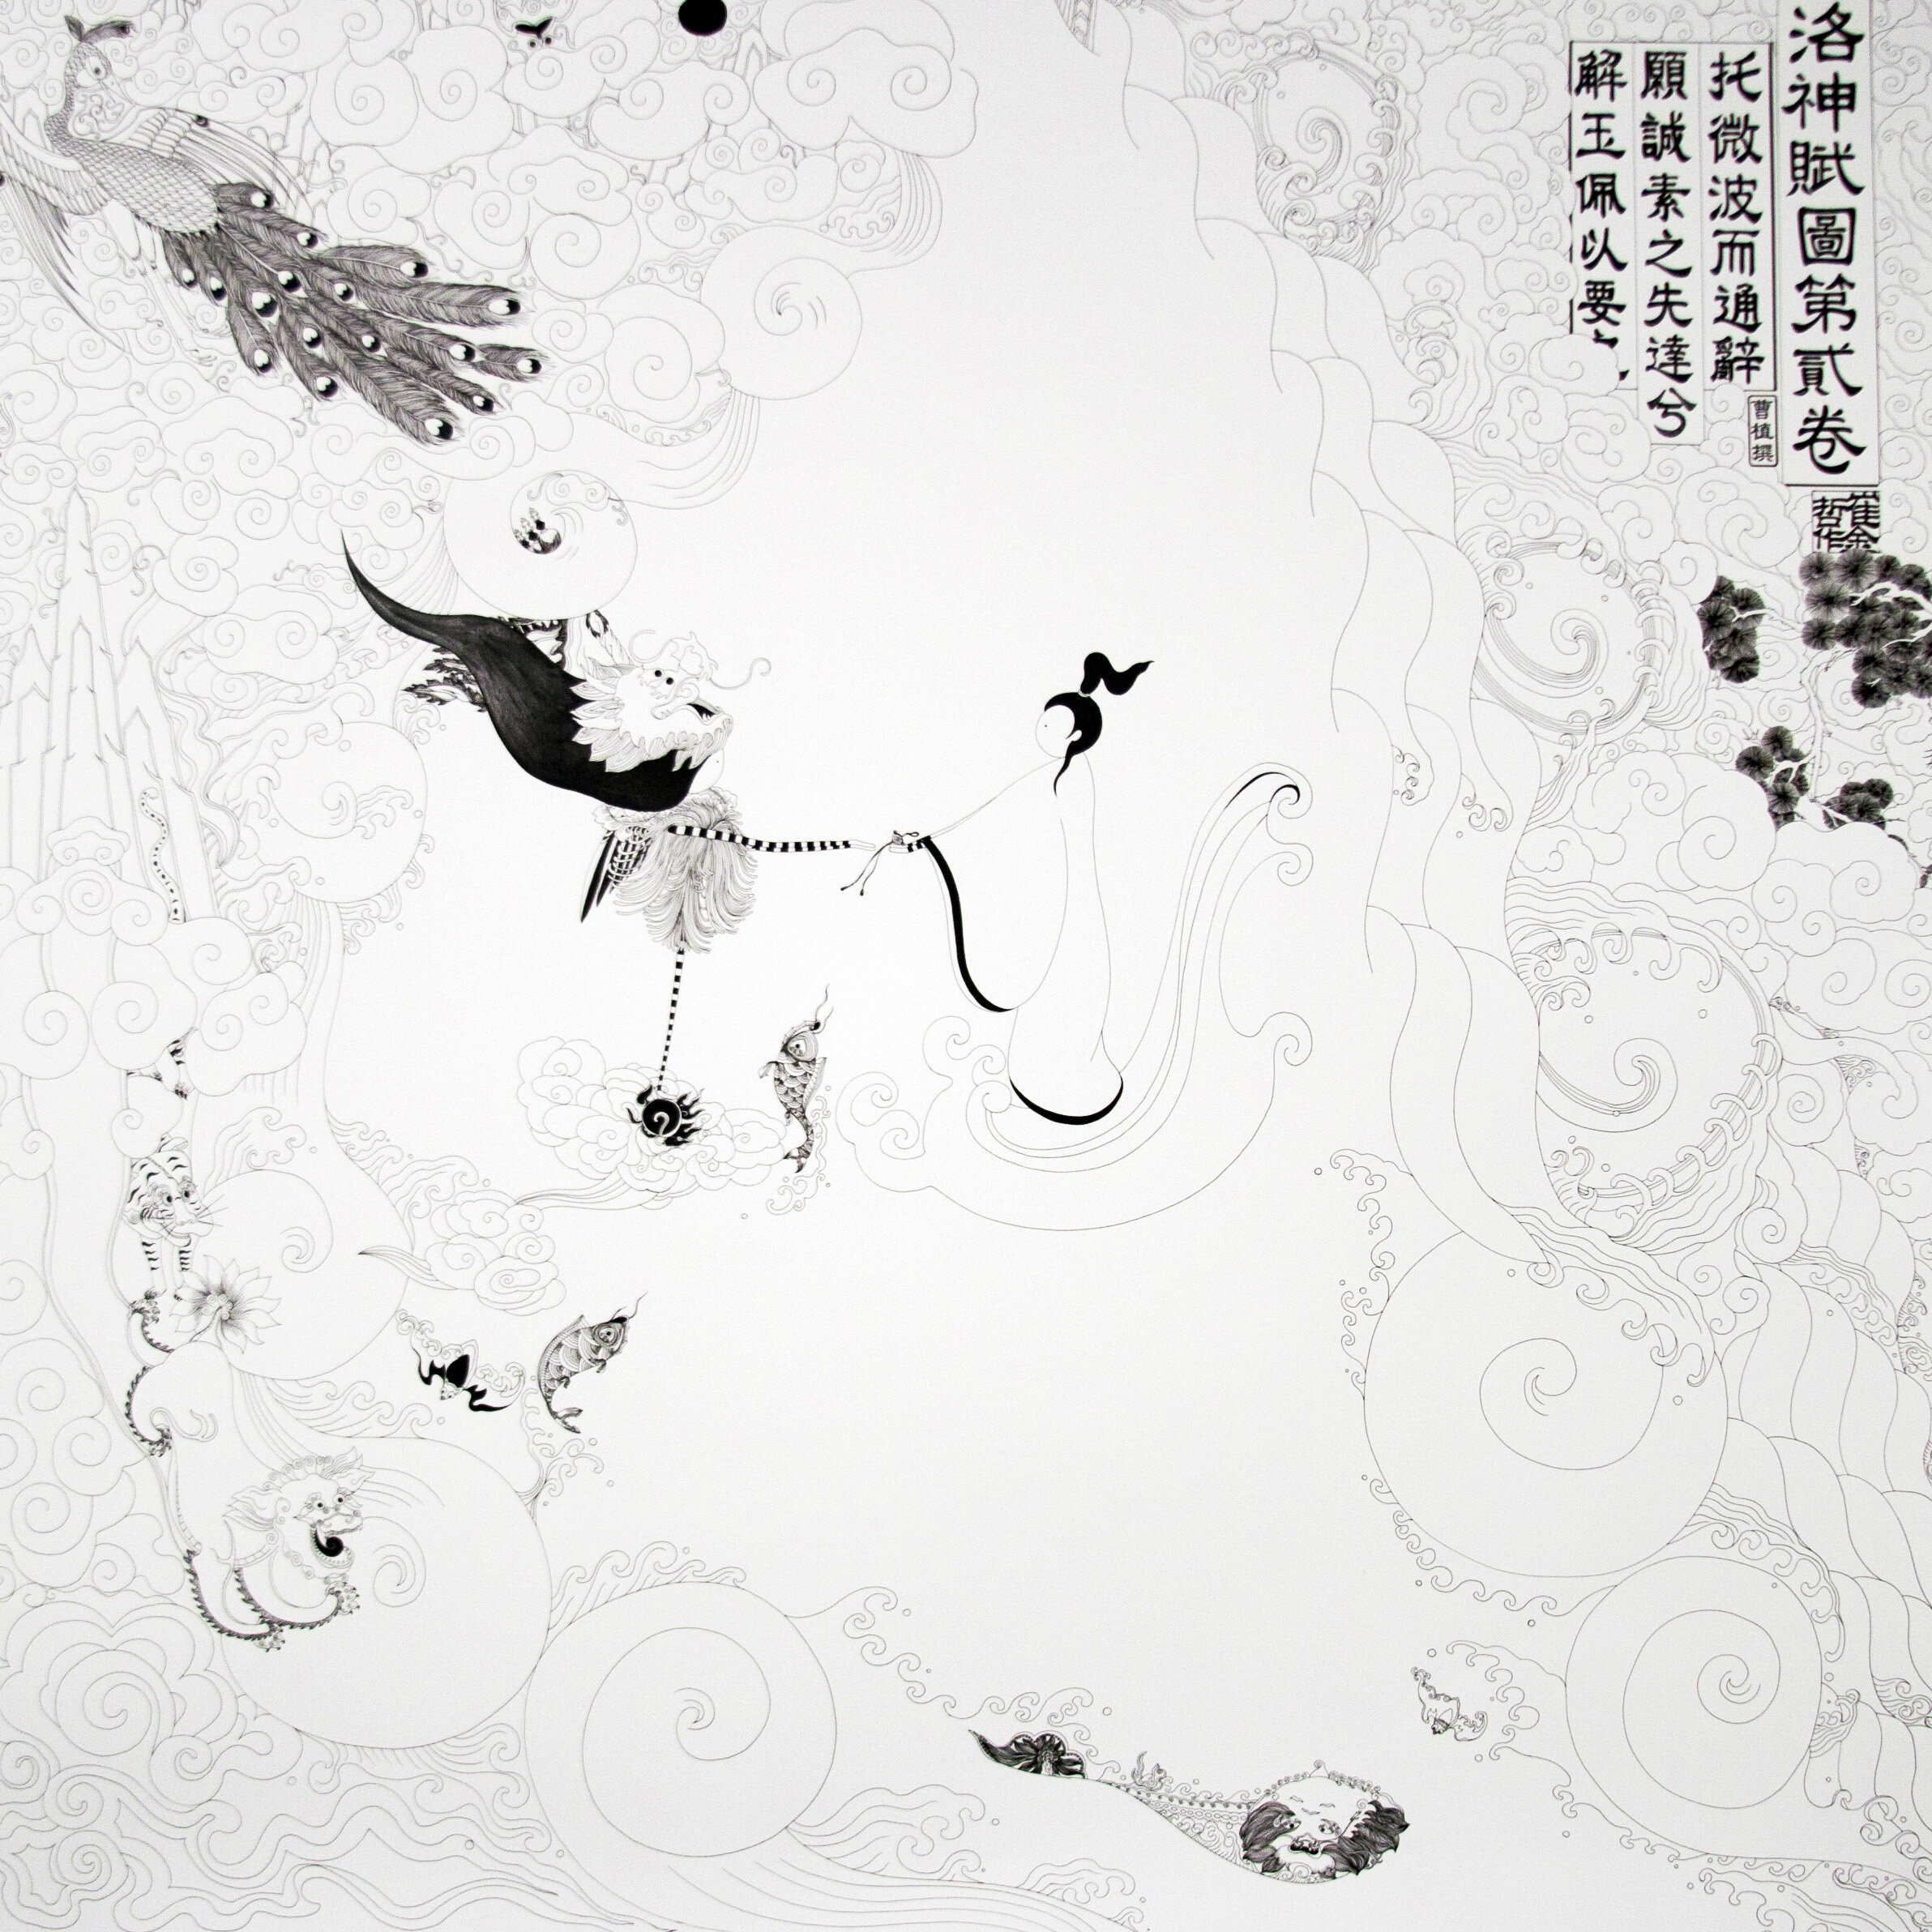  Cui Jinzhe,   卷二“相识”  Knowing and Trance , 2014. ink on paper. Photo: courtesy of the artist. 